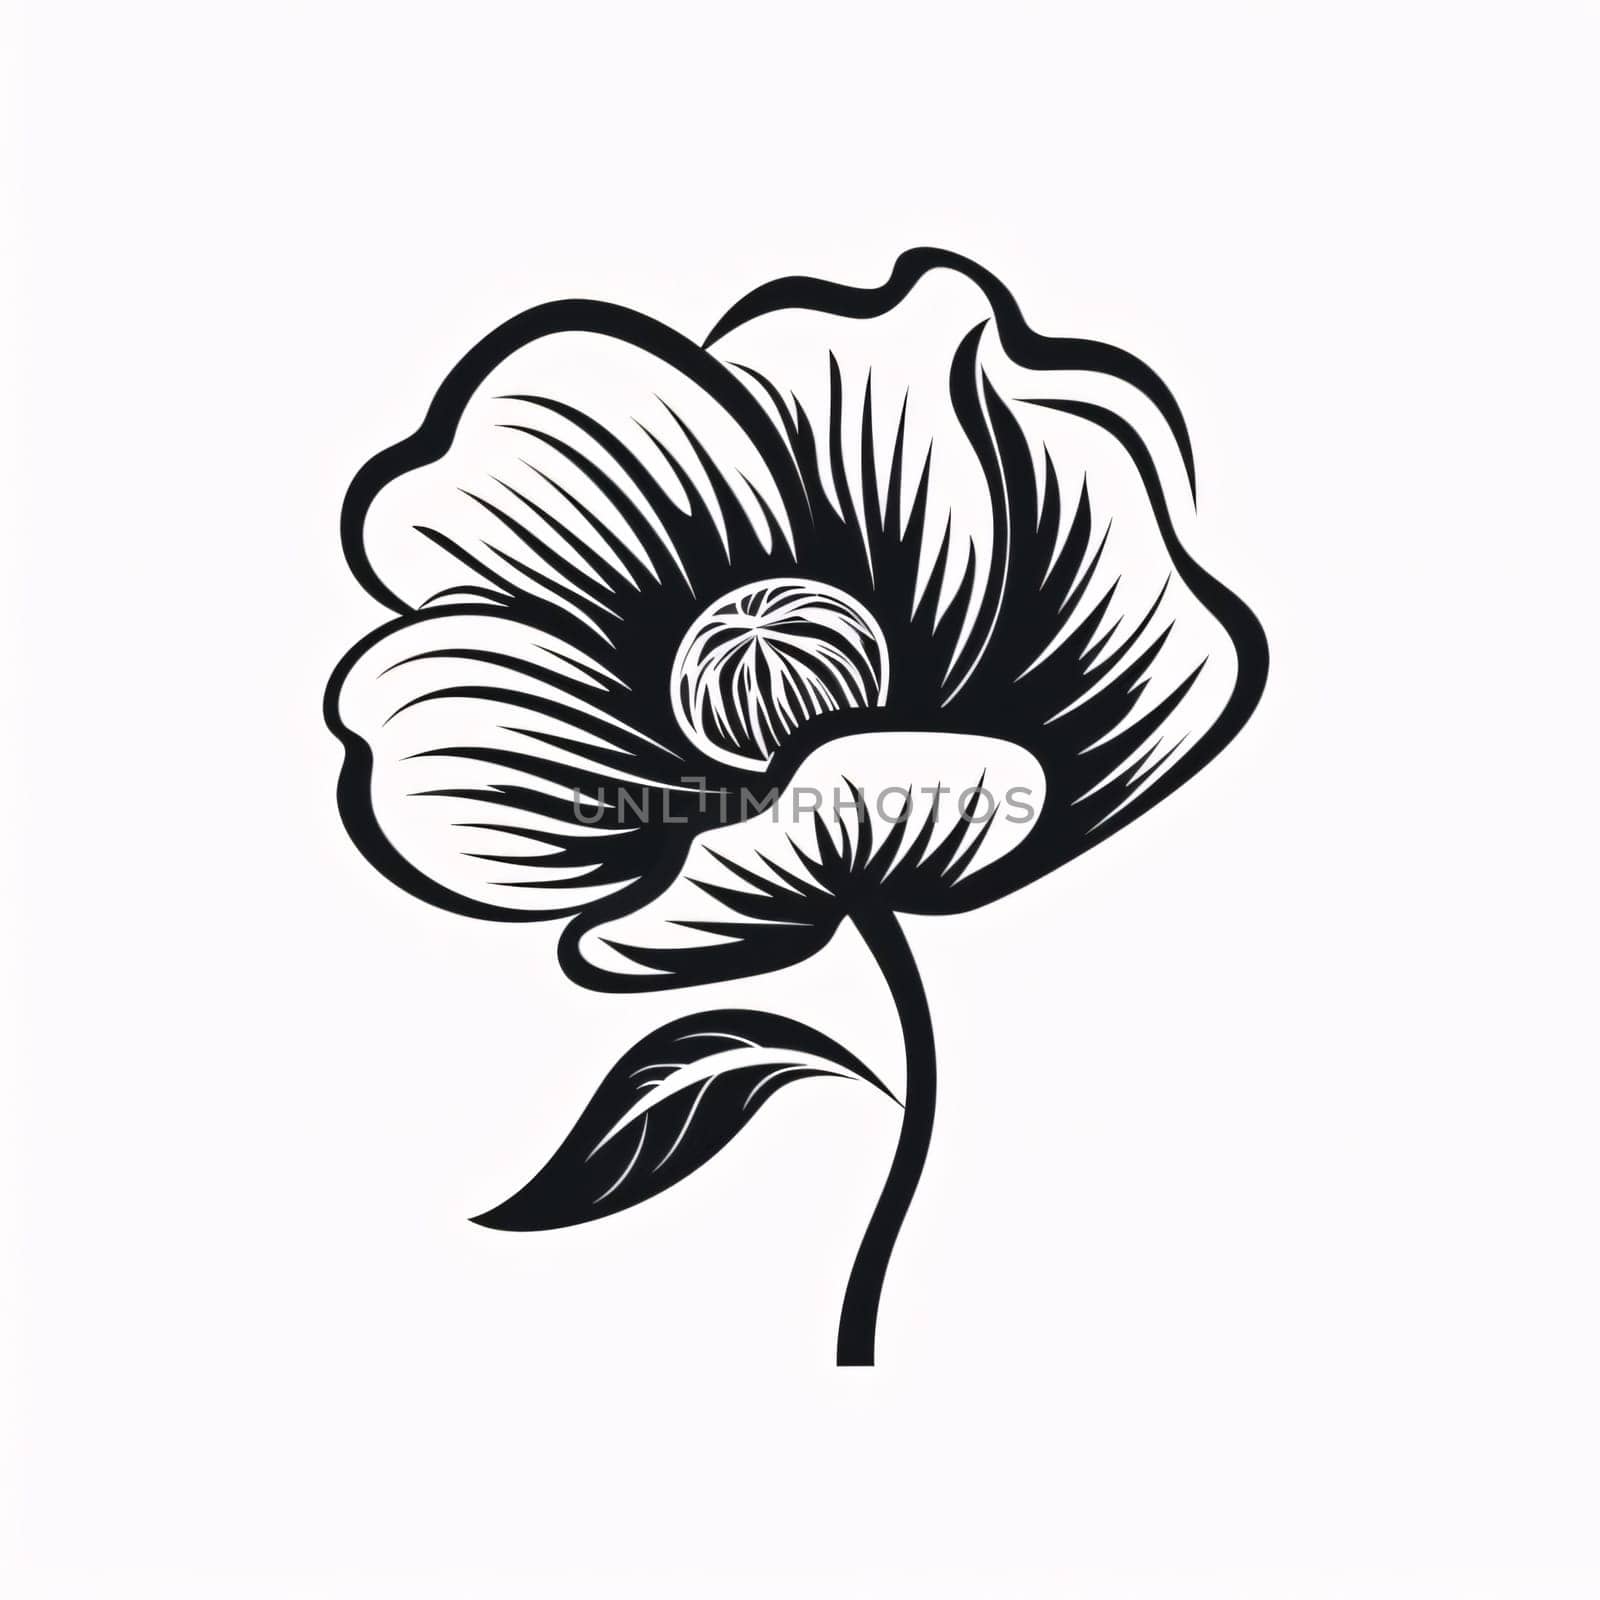 Logo concept black and white flower with leaf and petals. Flowering flowers, a symbol of spring, new life. A joyful time of nature waking up to life.